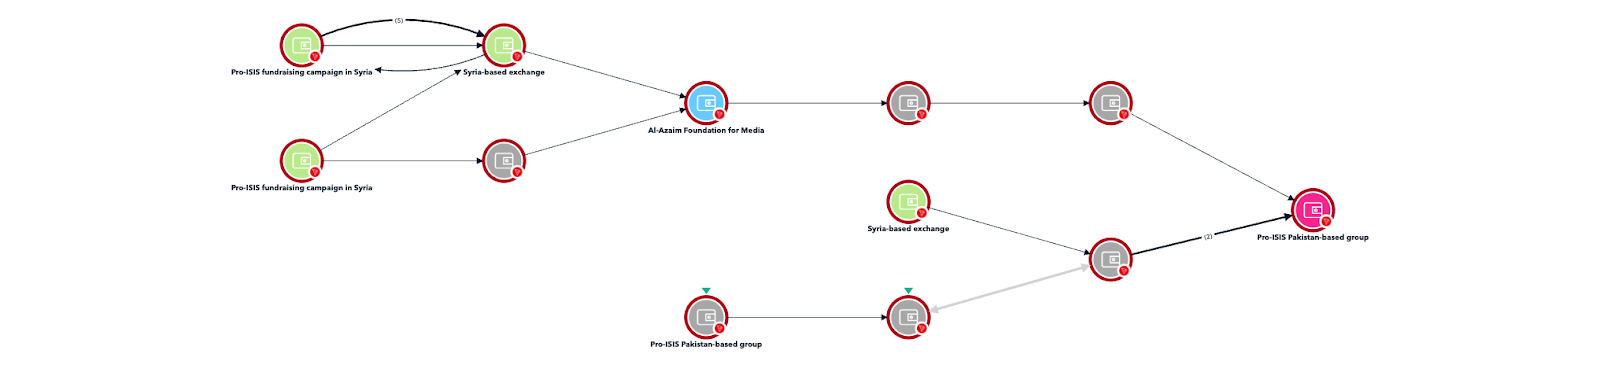 Links Between ISIS Affiliates and the Pakistan-based Group. 